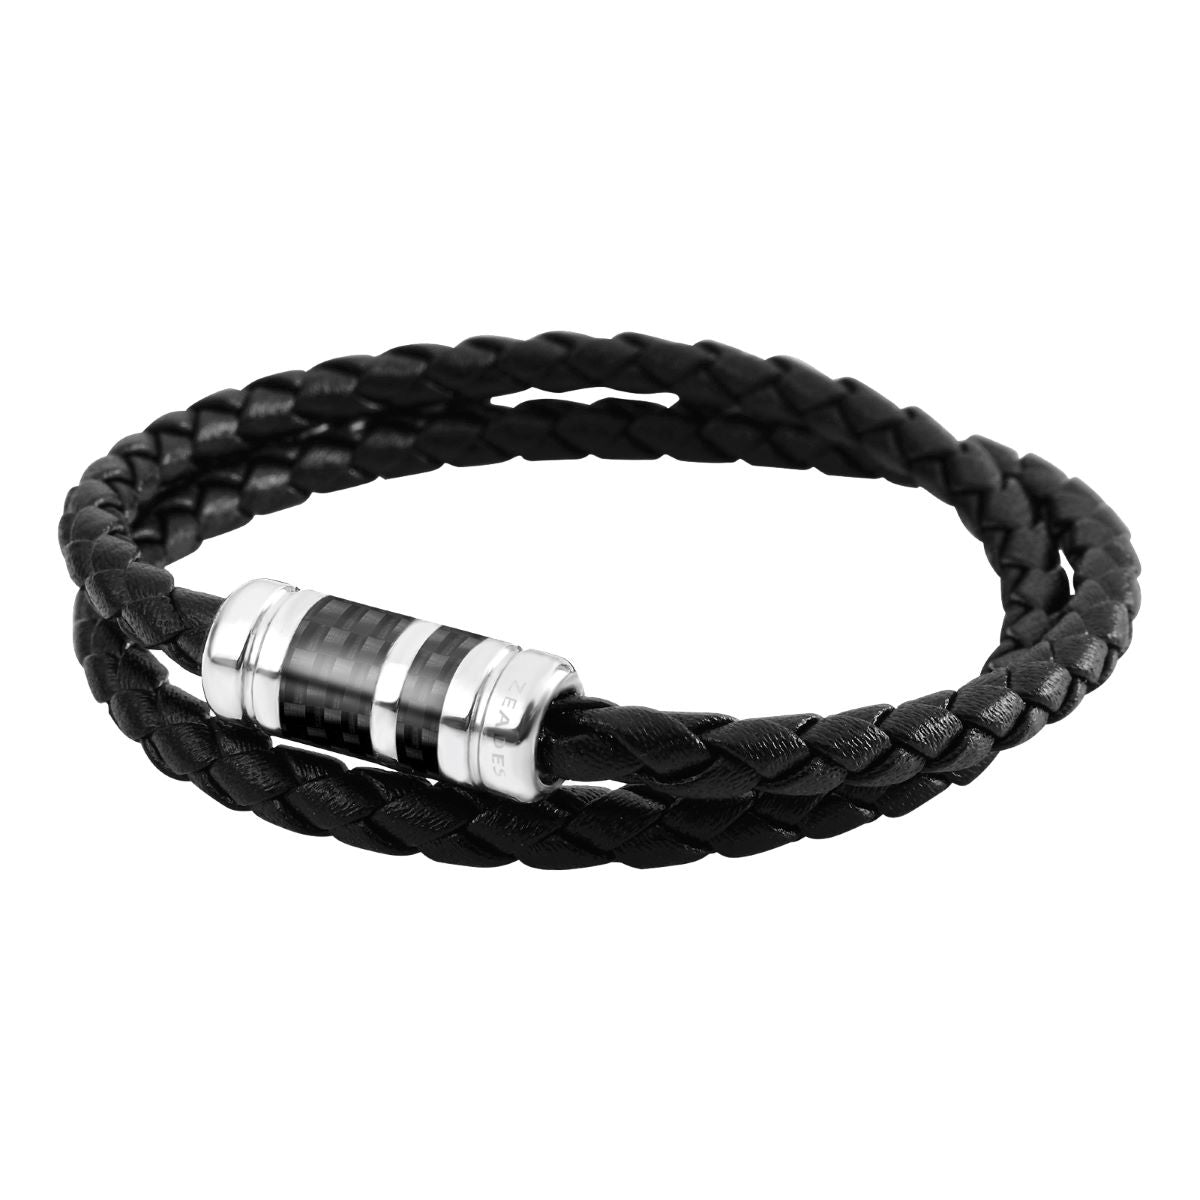 Leather Double-Wrap Braided Black Bracelet with Carbon